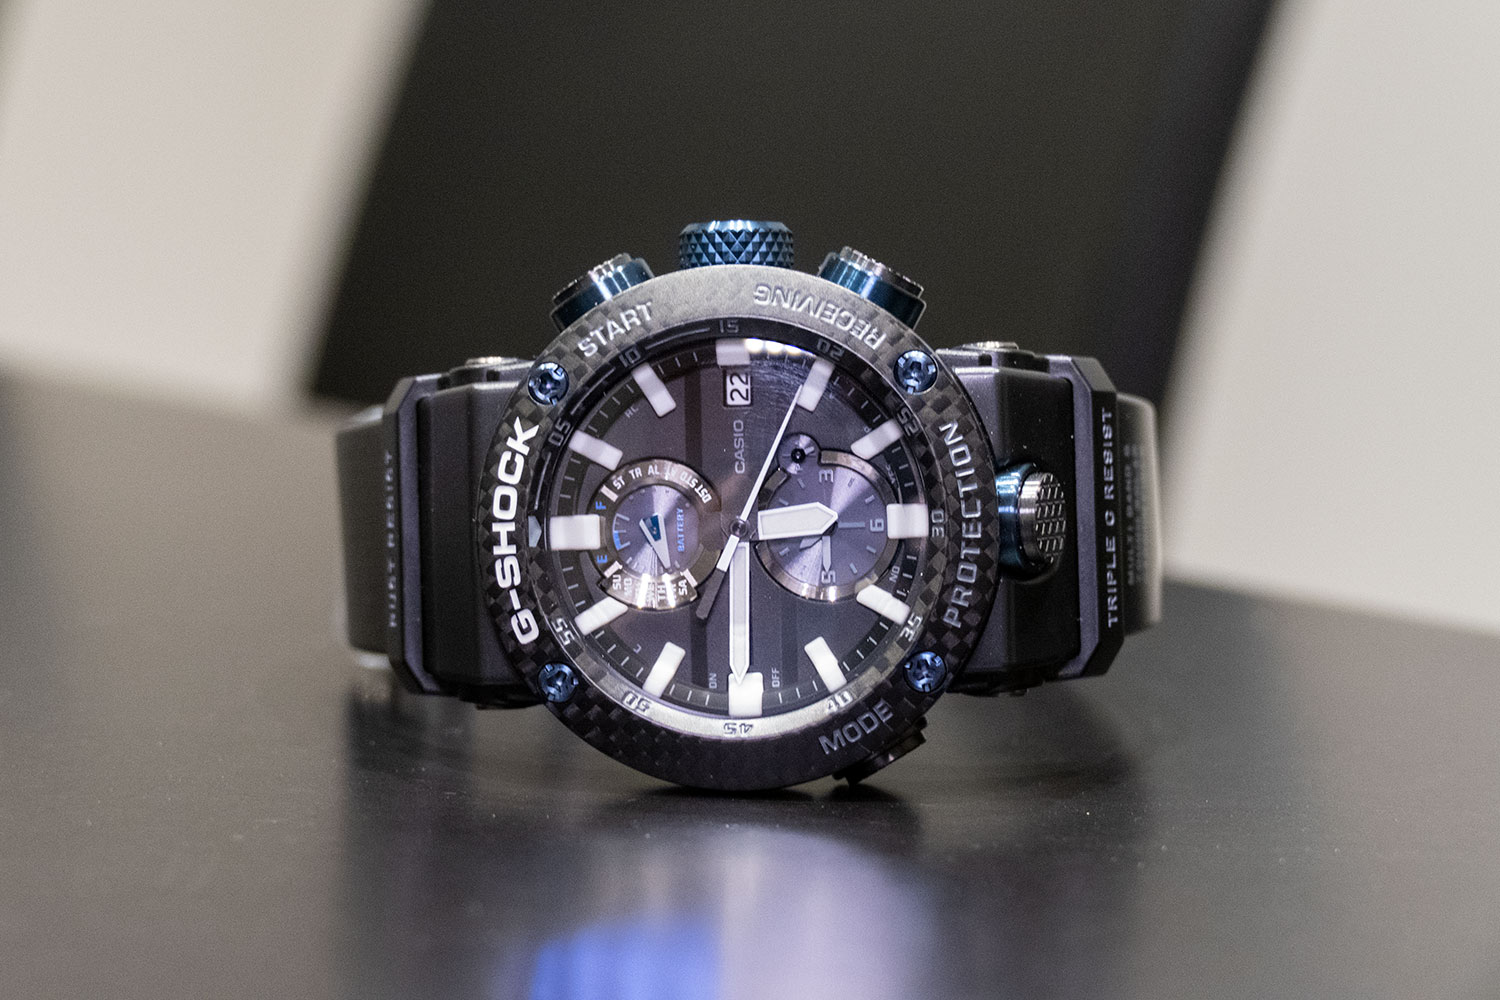 Carbon Fiber is Making Casio's New Connected G-Shocks Even Tougher